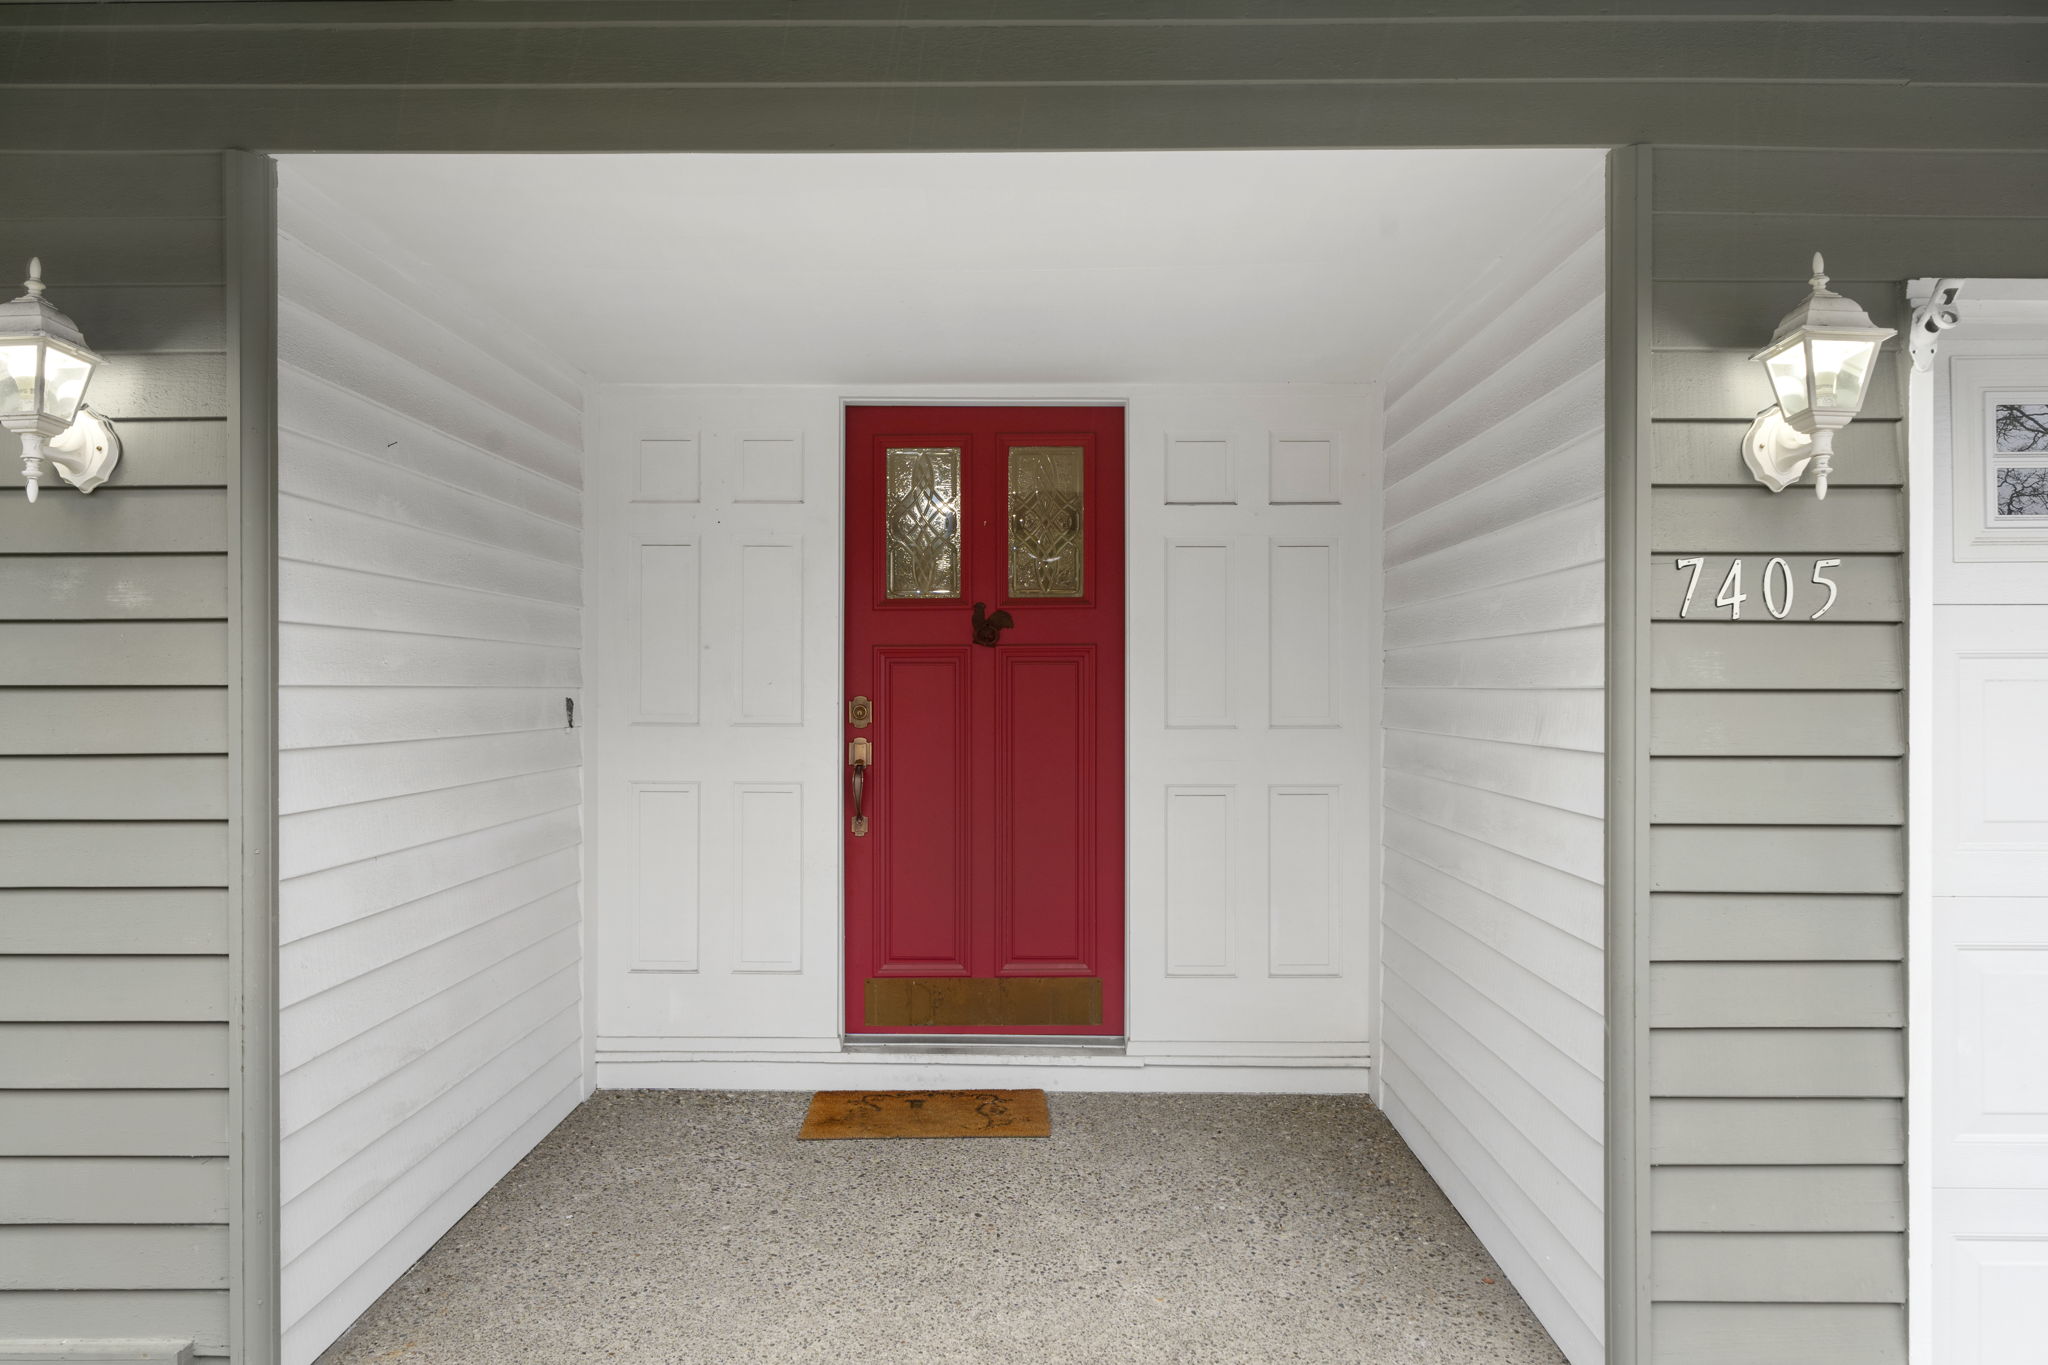 Extra large covered entry could easily hold a bistro set, rockers, or potted plants. Can you imagine all your holiday décor in this bright alcove?!